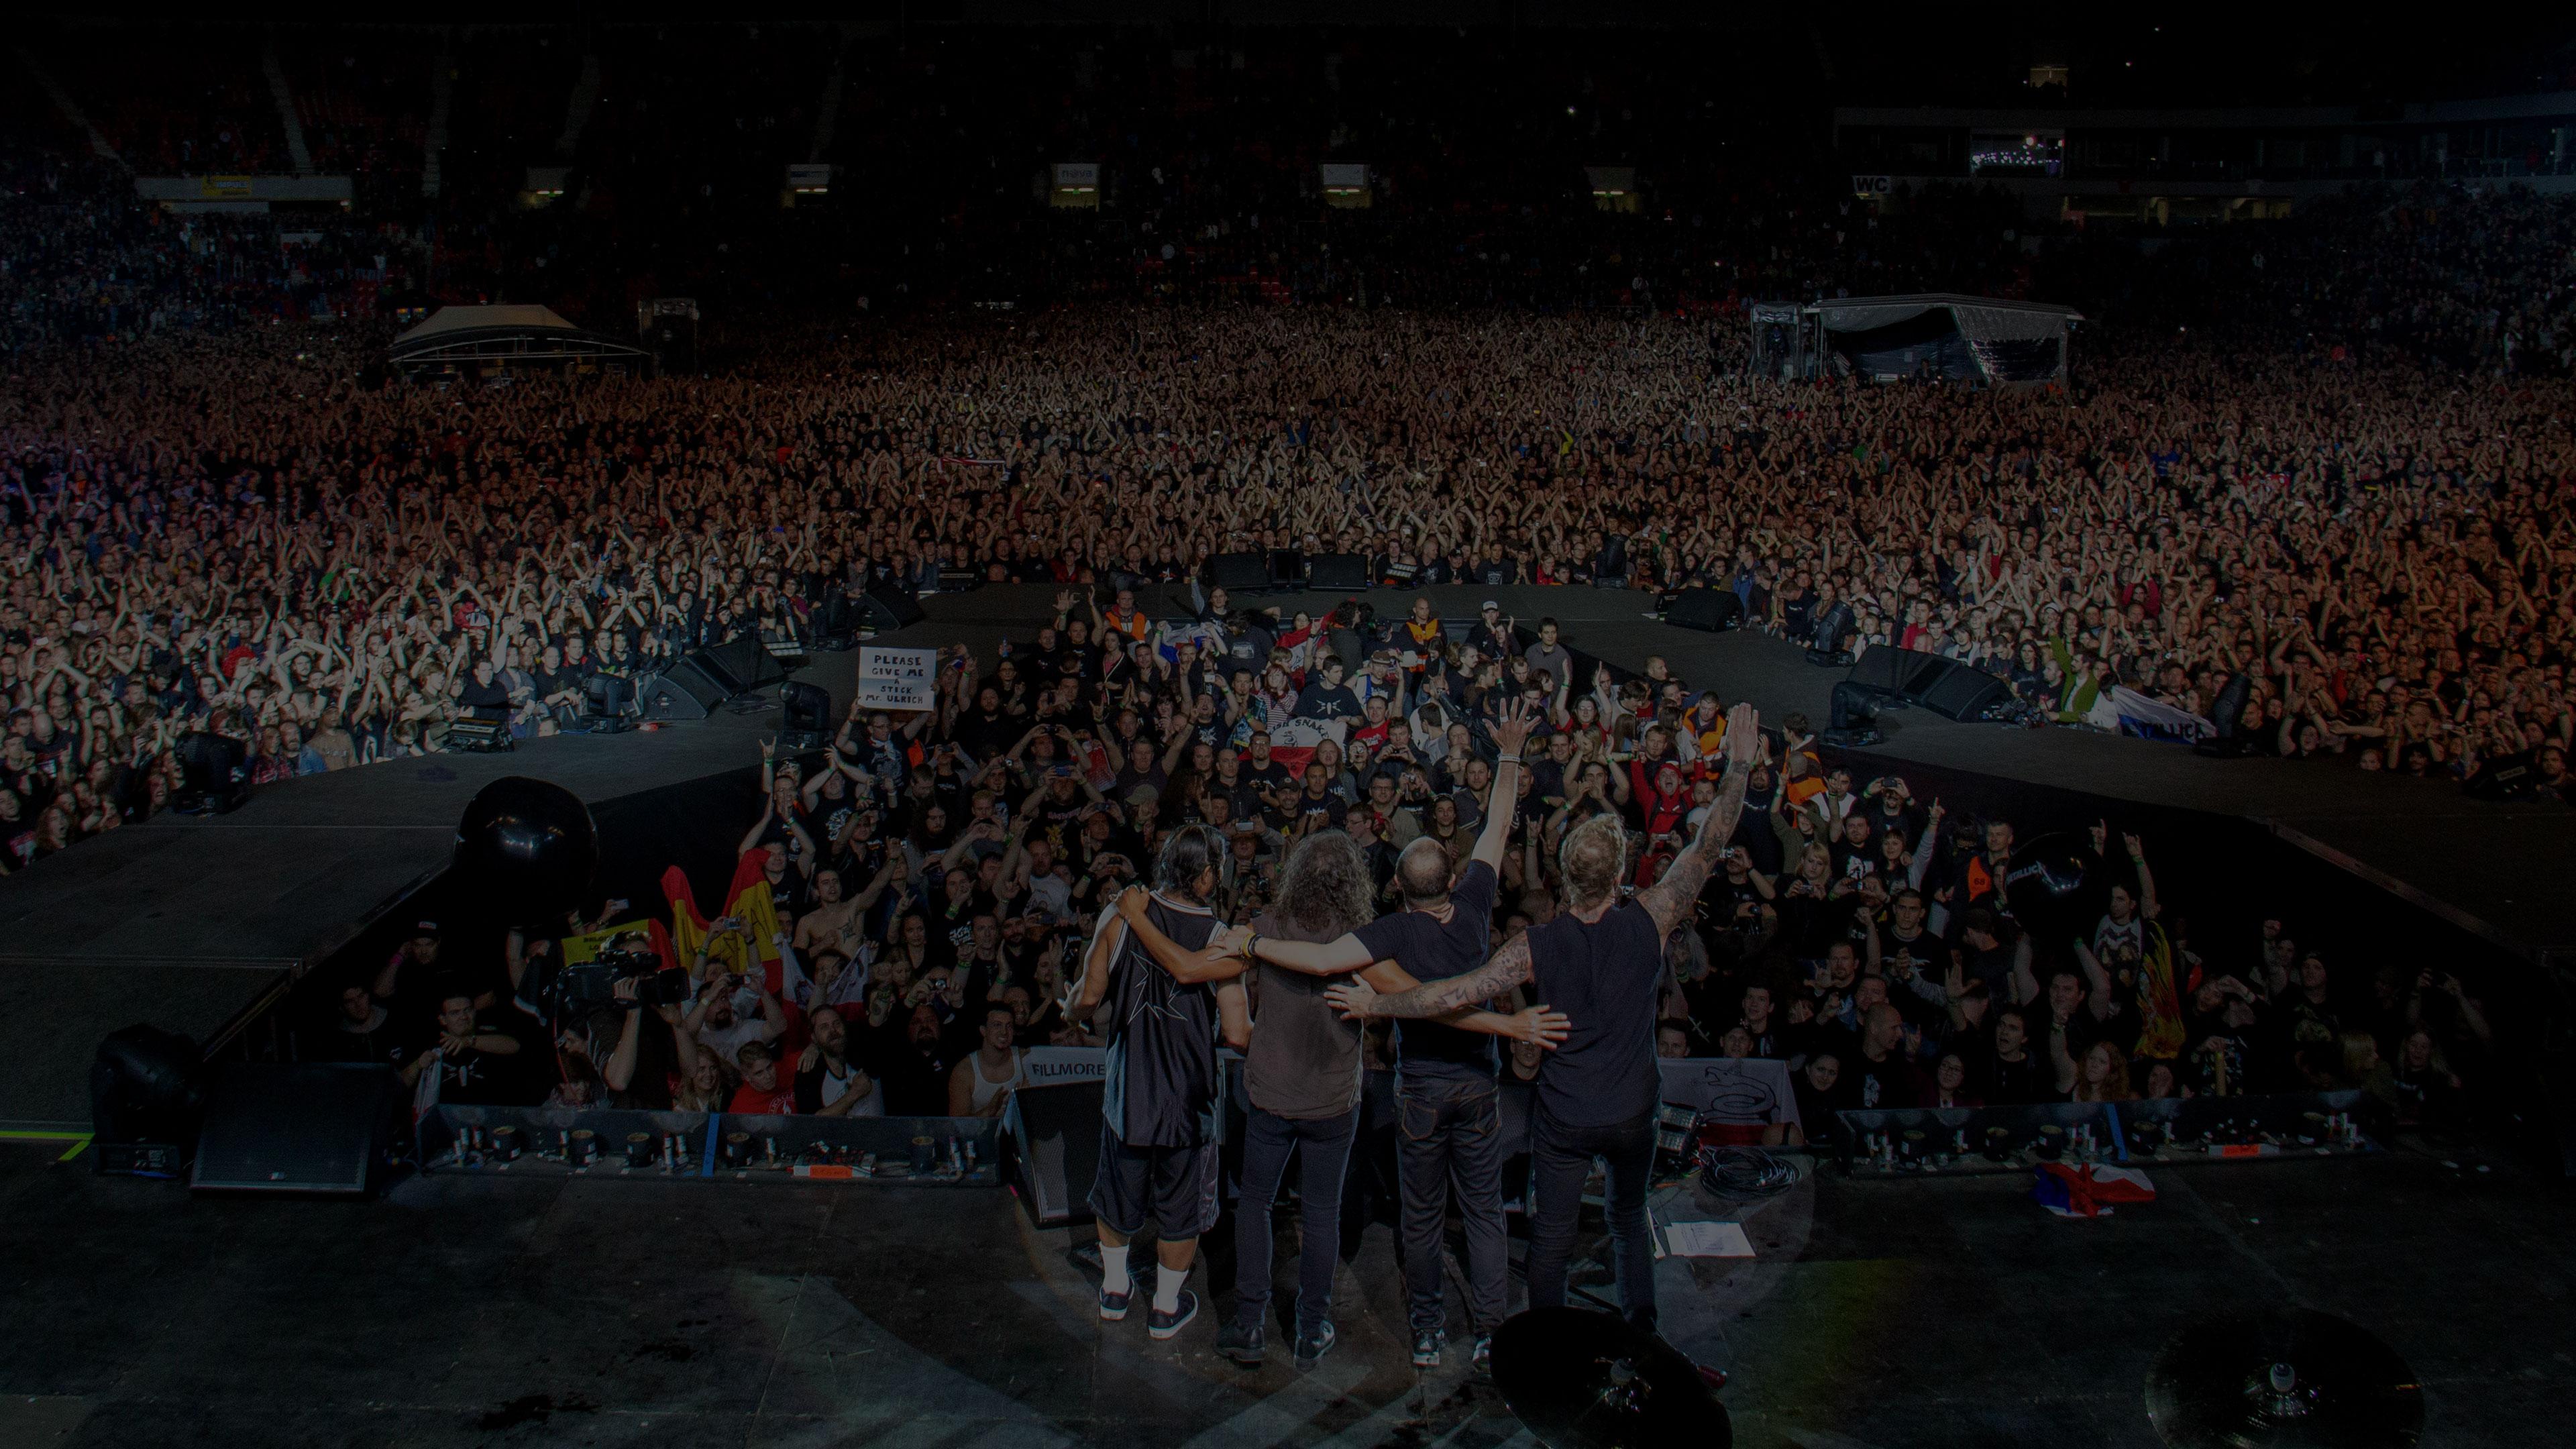 Banner Image for the photo gallery from the gig in Prague, Czech Republic shot on May 7, 2012